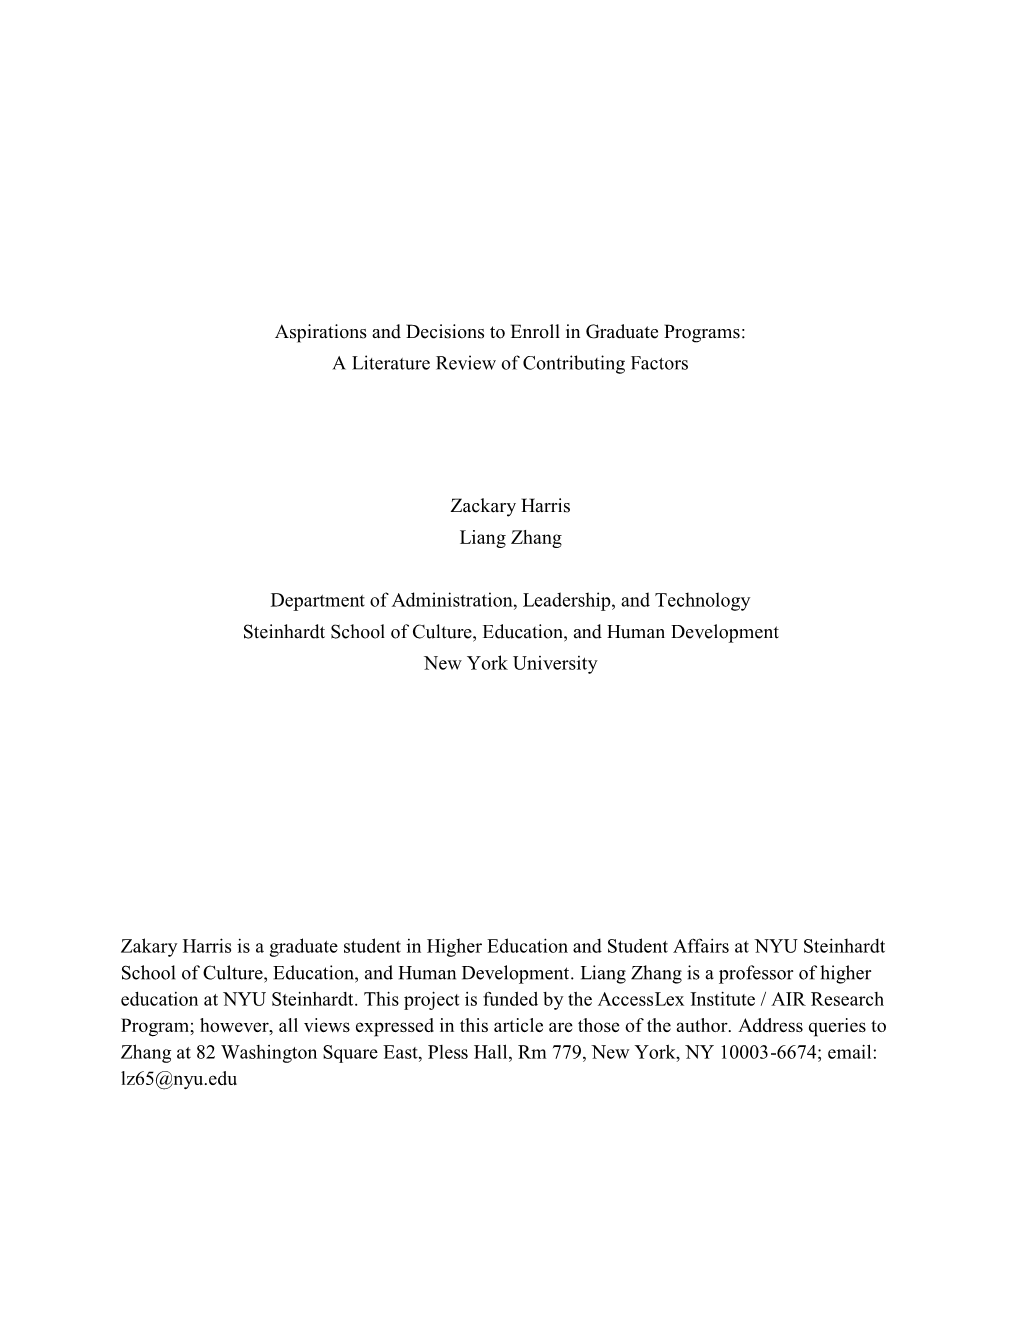 Aspirations and Decisions to Enroll in Graduate Programs: a Literature Review of Contributing Factors